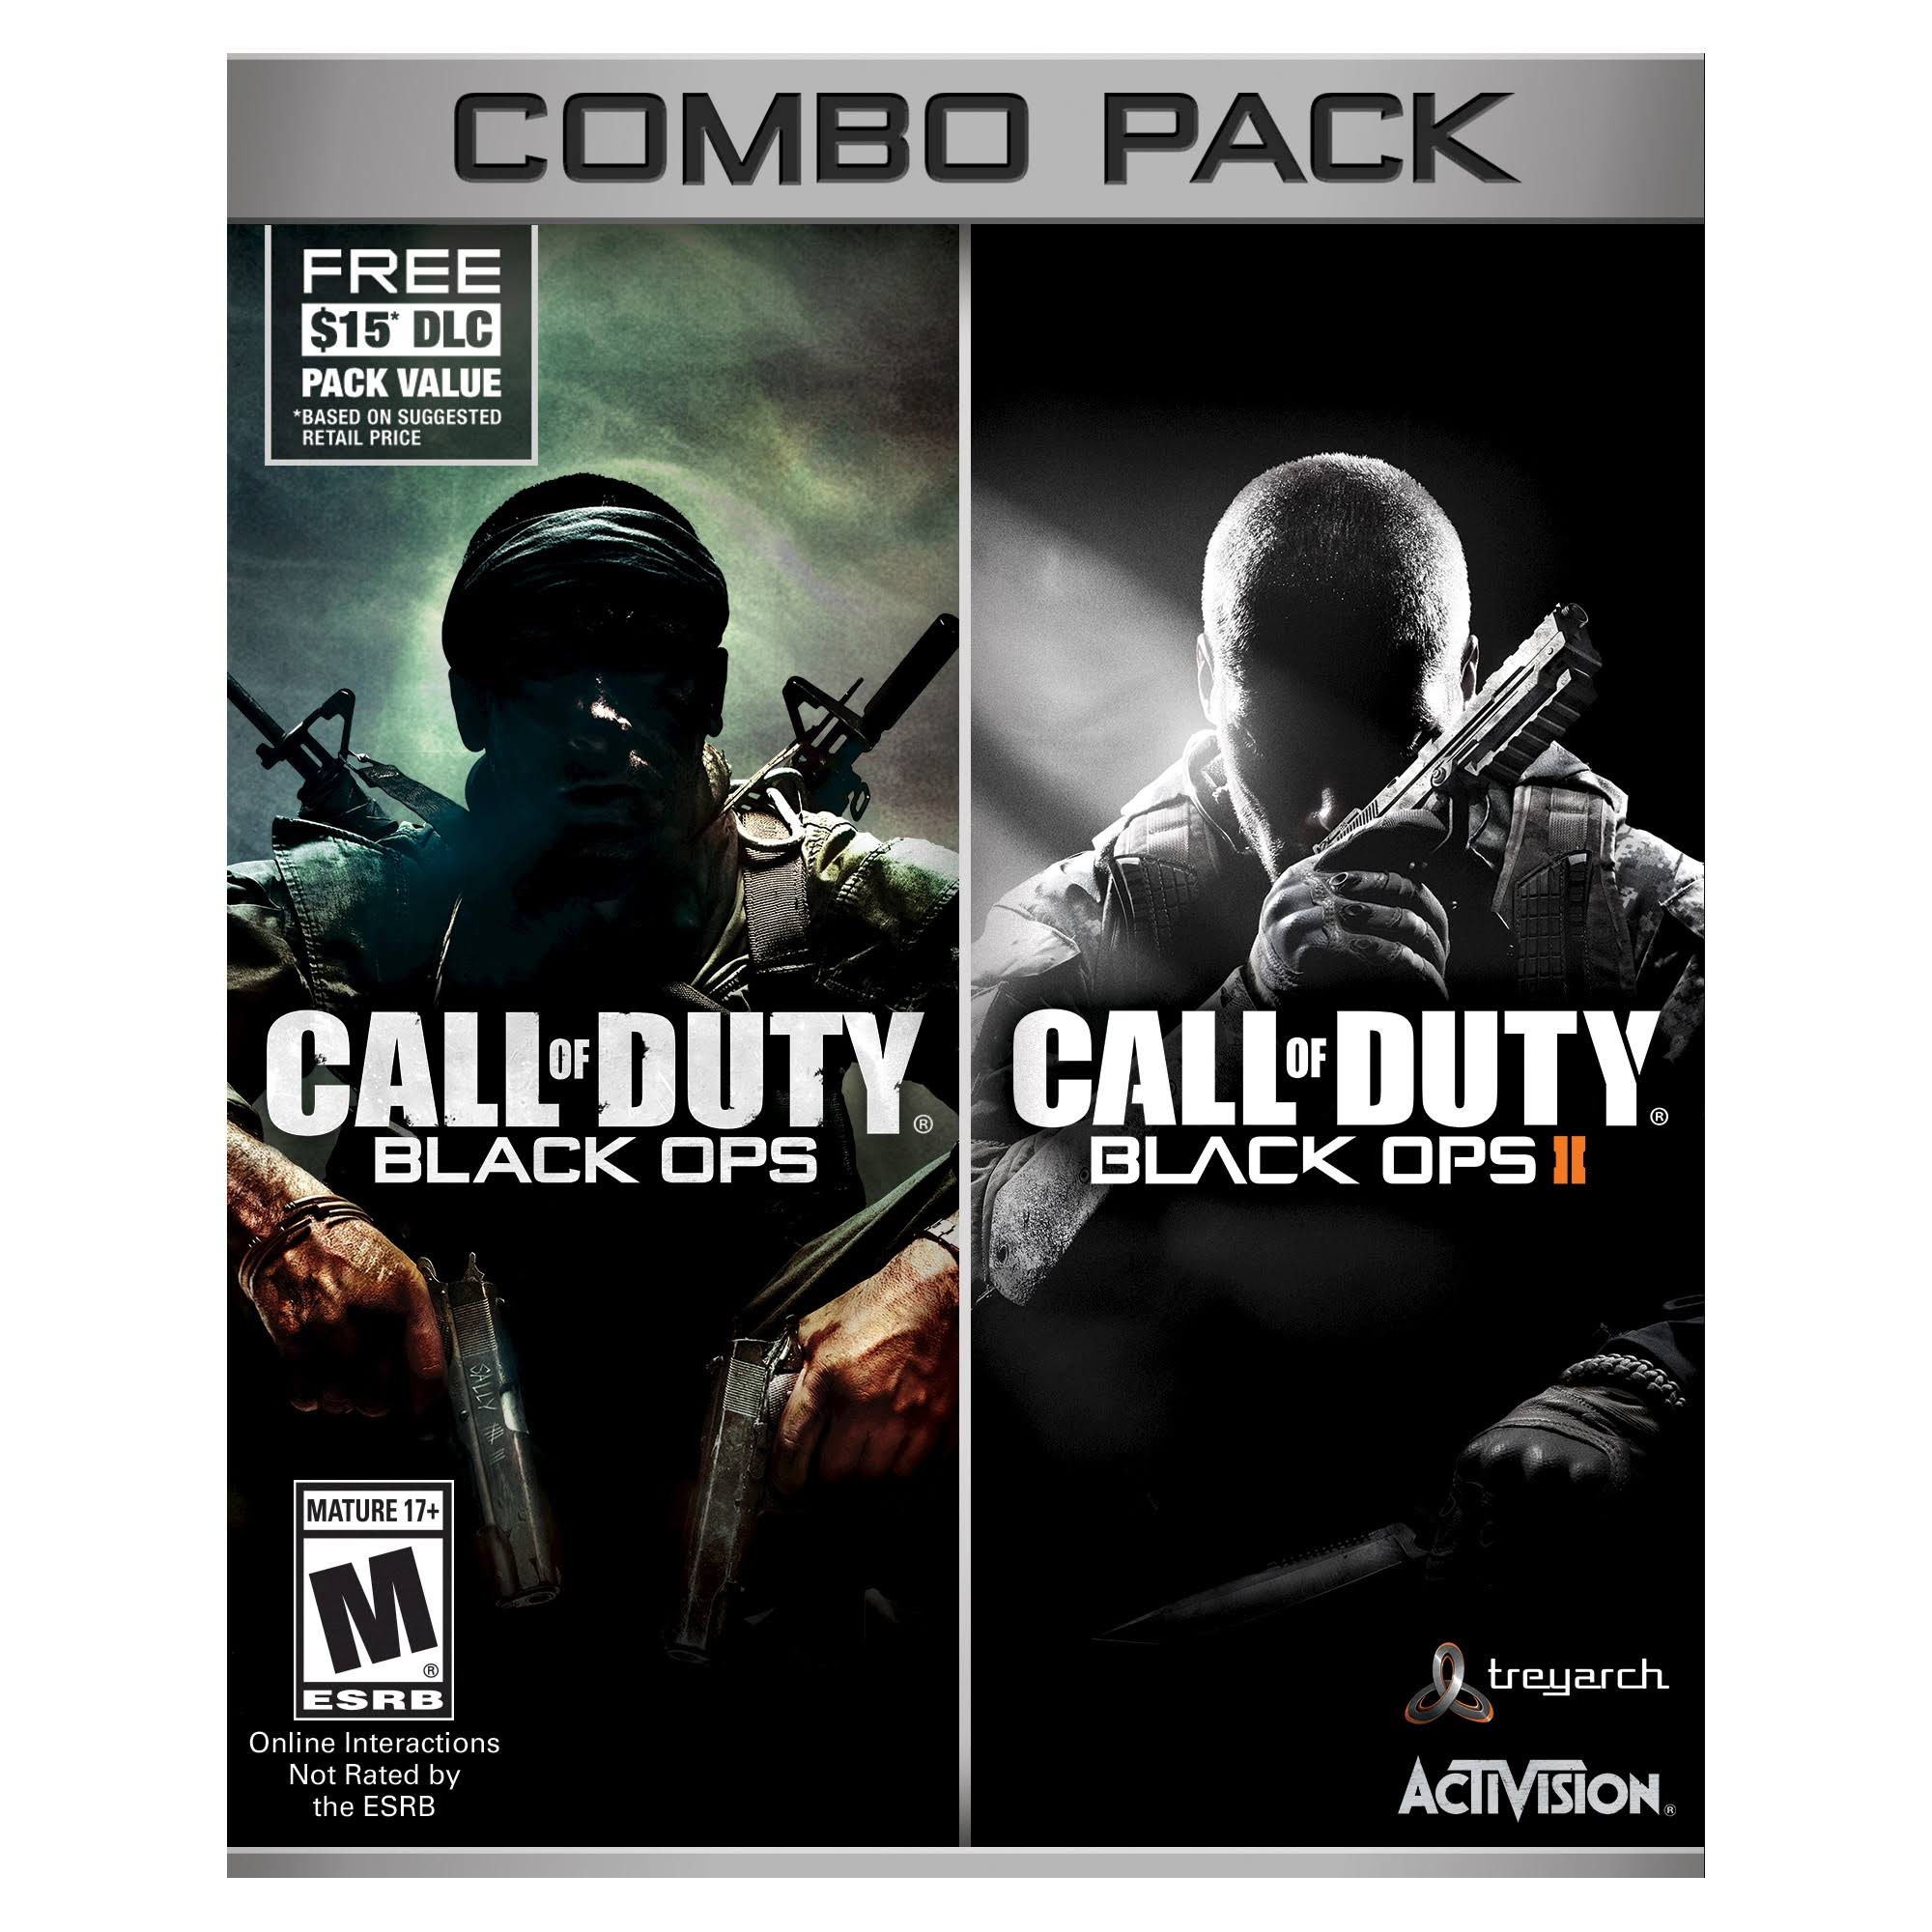 Call of Duty: Black Ops Combo Pack - PlayStation 3